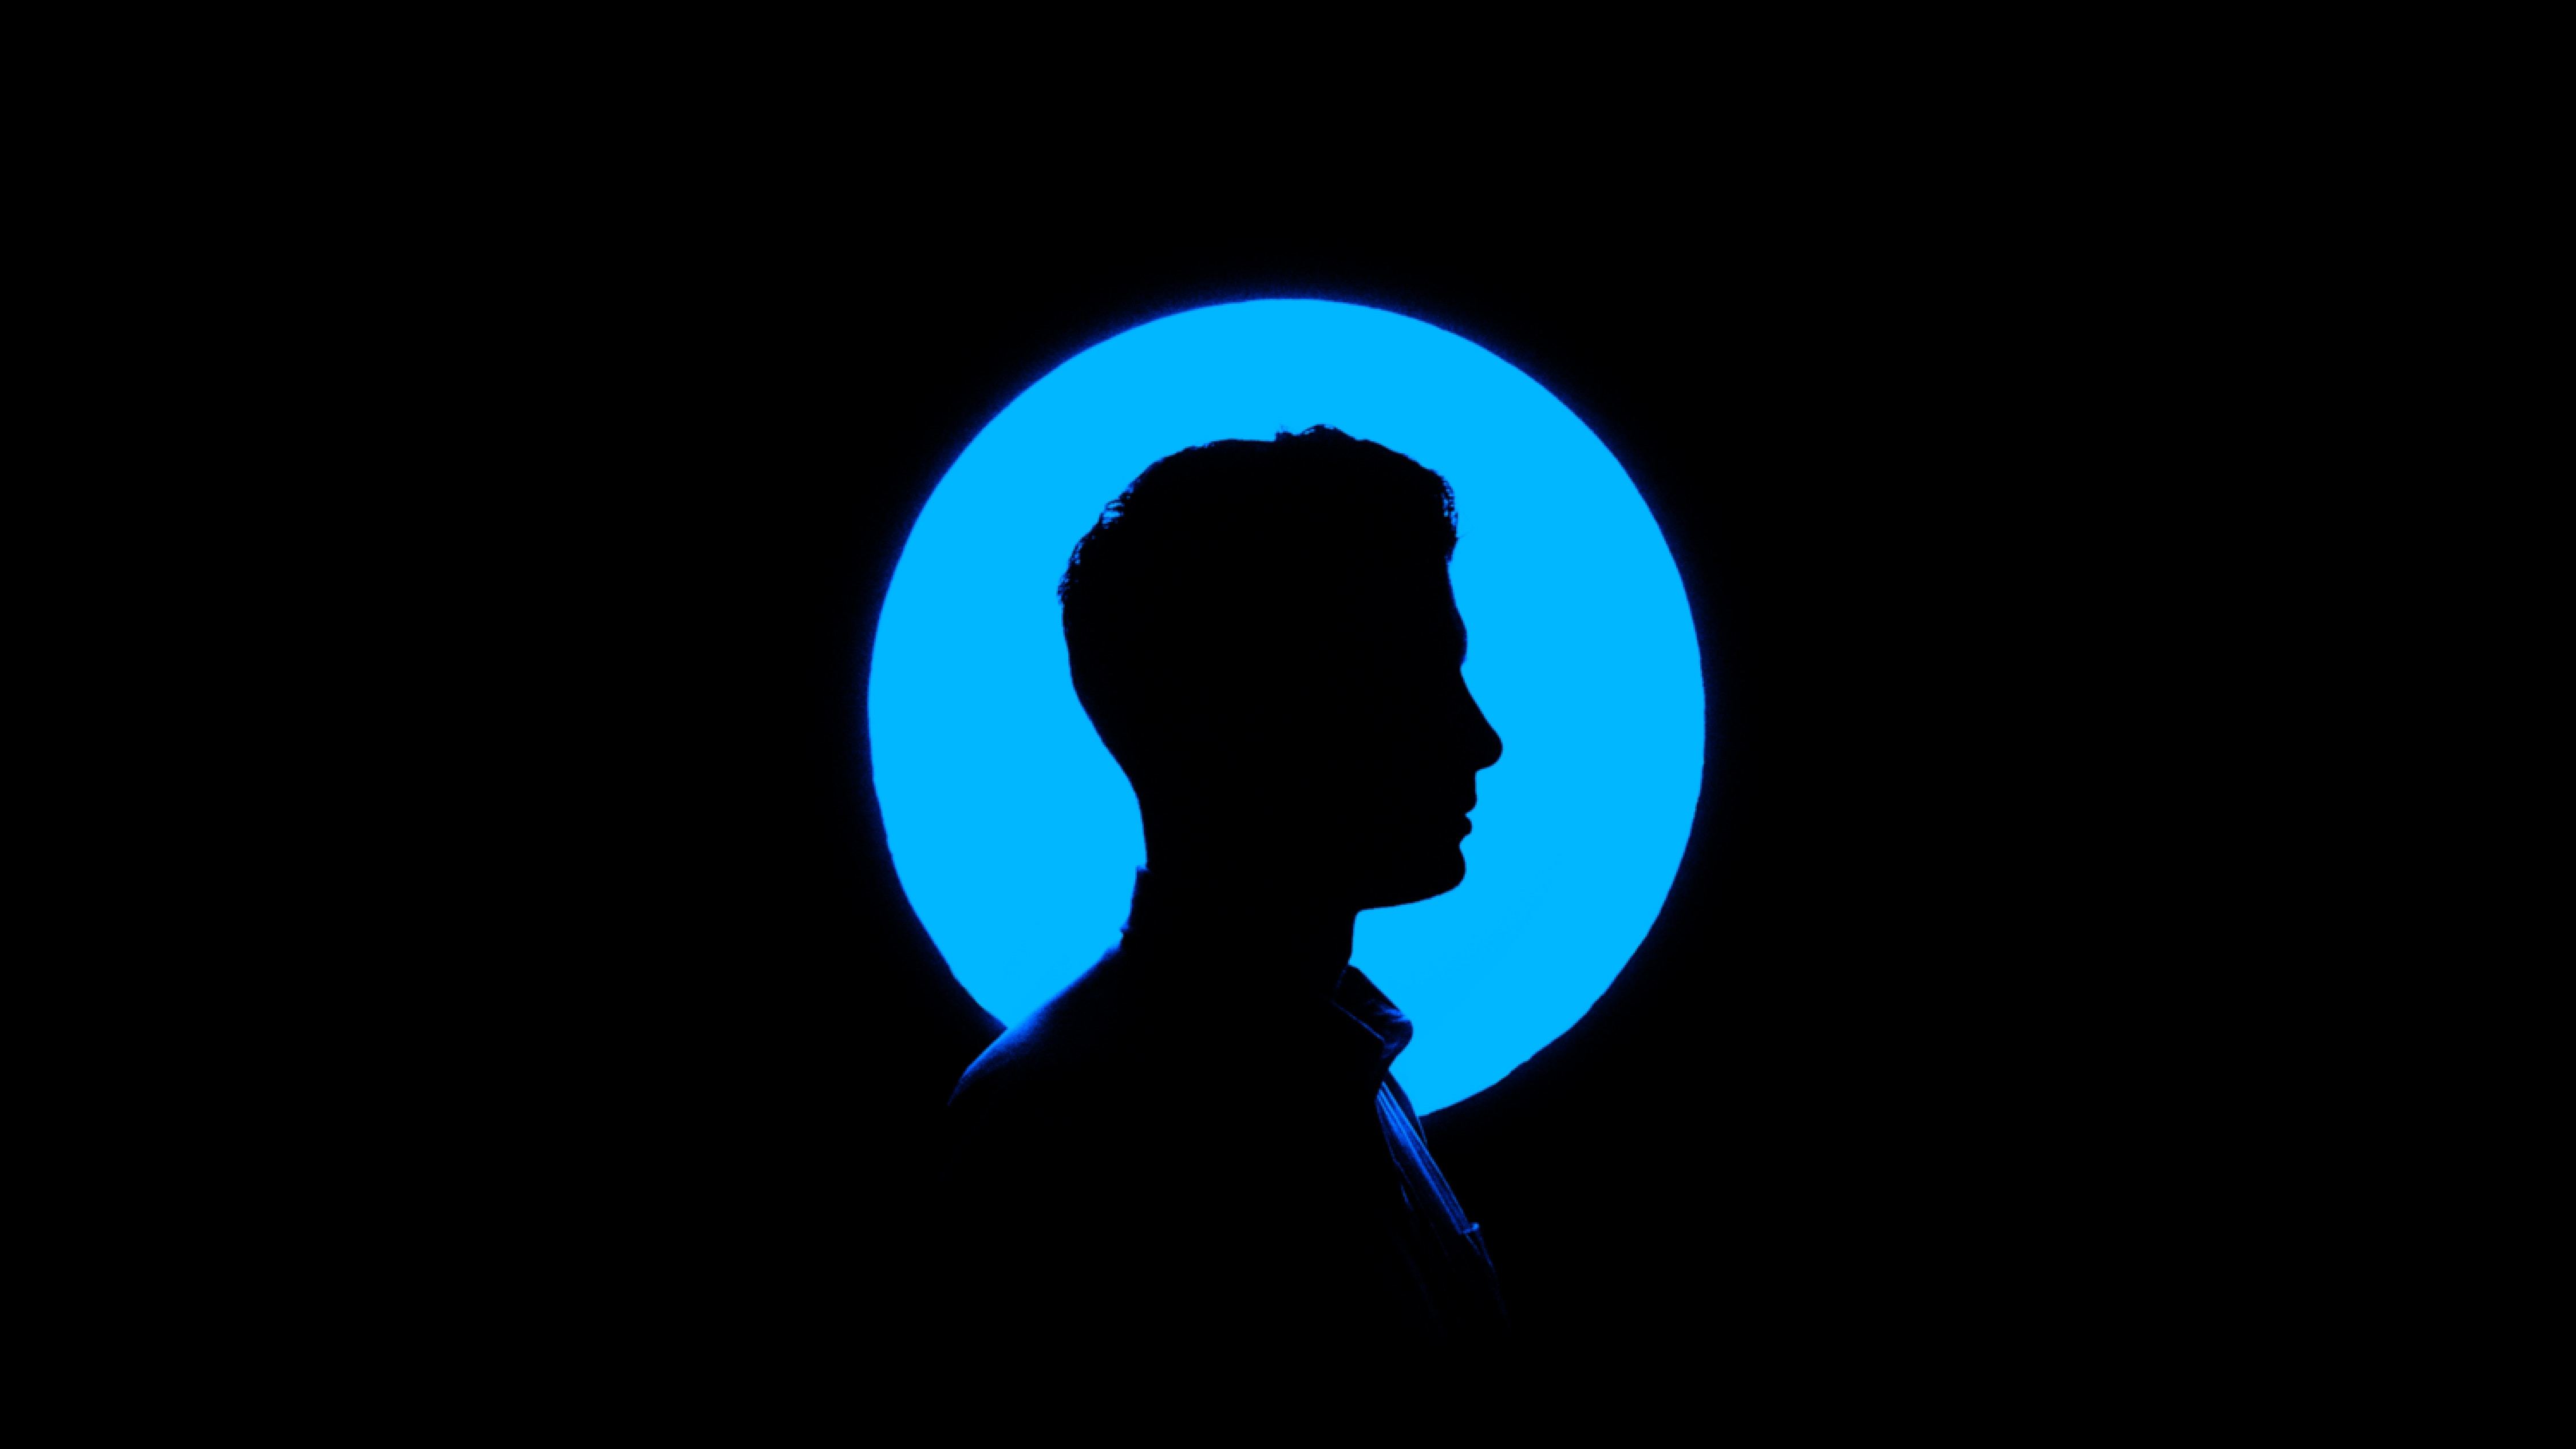 macbook pro retina wallpaper 2880x1800,backlighting,silhouette,darkness,photography,electric blue